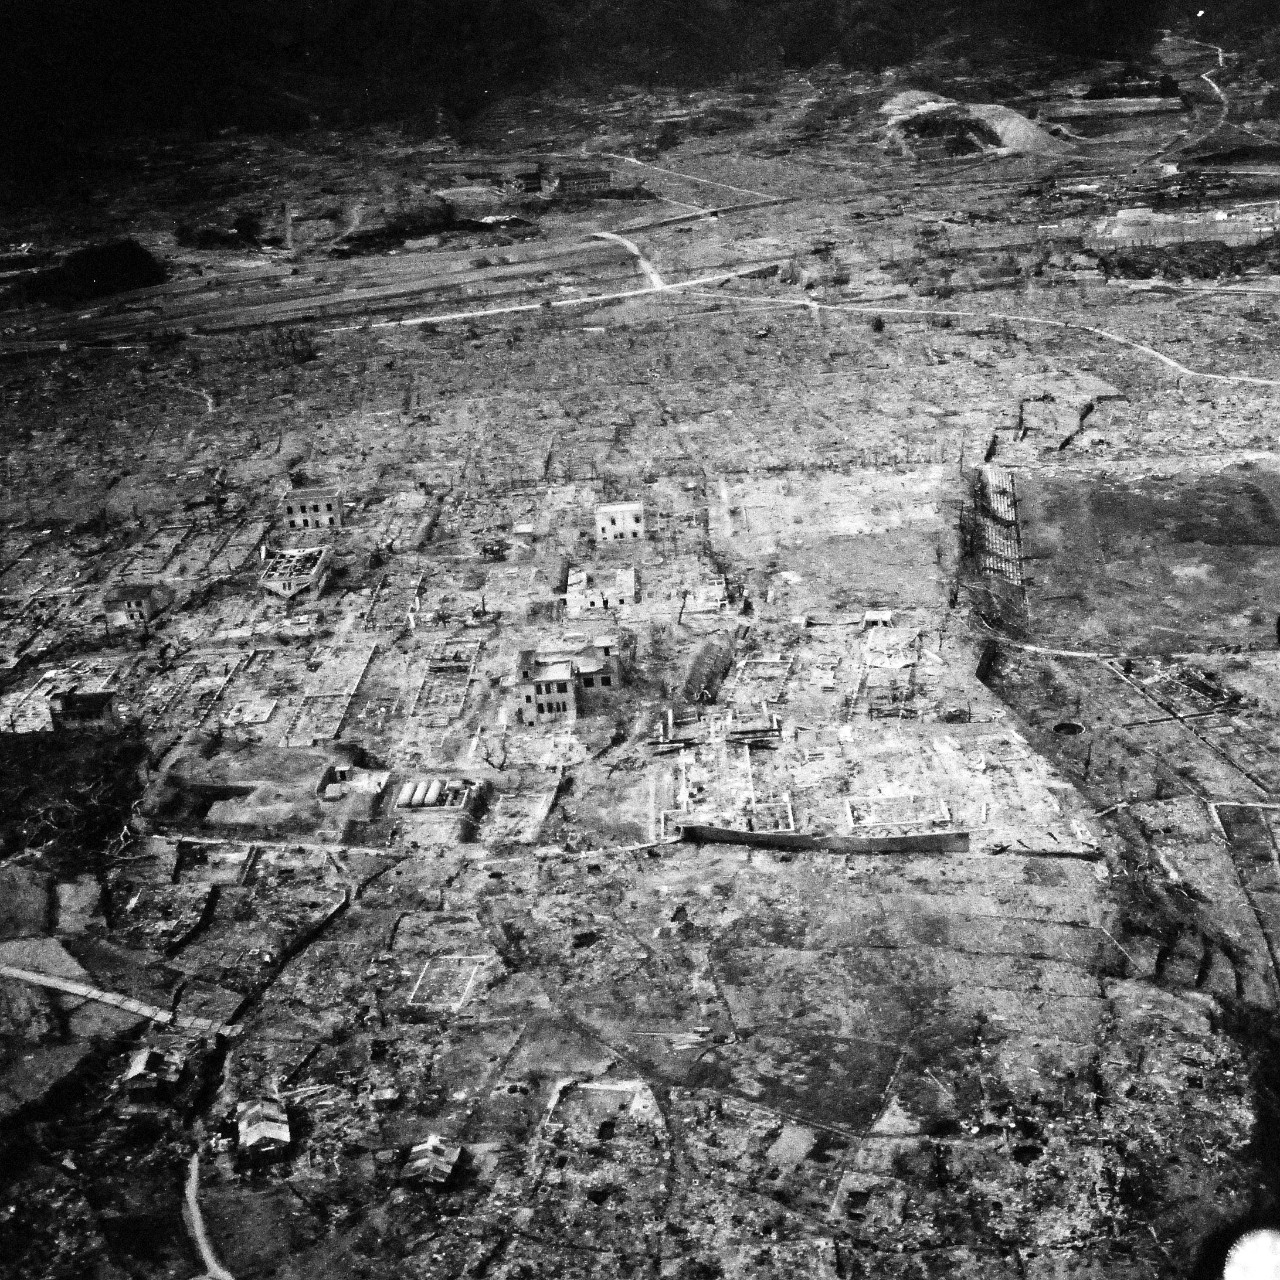 80-G-264905:   Nagasaki, Japan, 1945.   Aerial view of the bomb damage from August 9, 1945.  Altitude of 300’.  Photographed by USS Chenango (CVE-28) aircraft on October 15, 1945.  (2015/12/01).   Official U.S. Navy photograph, now in the collections of the National Archives.   (2015/12/01).